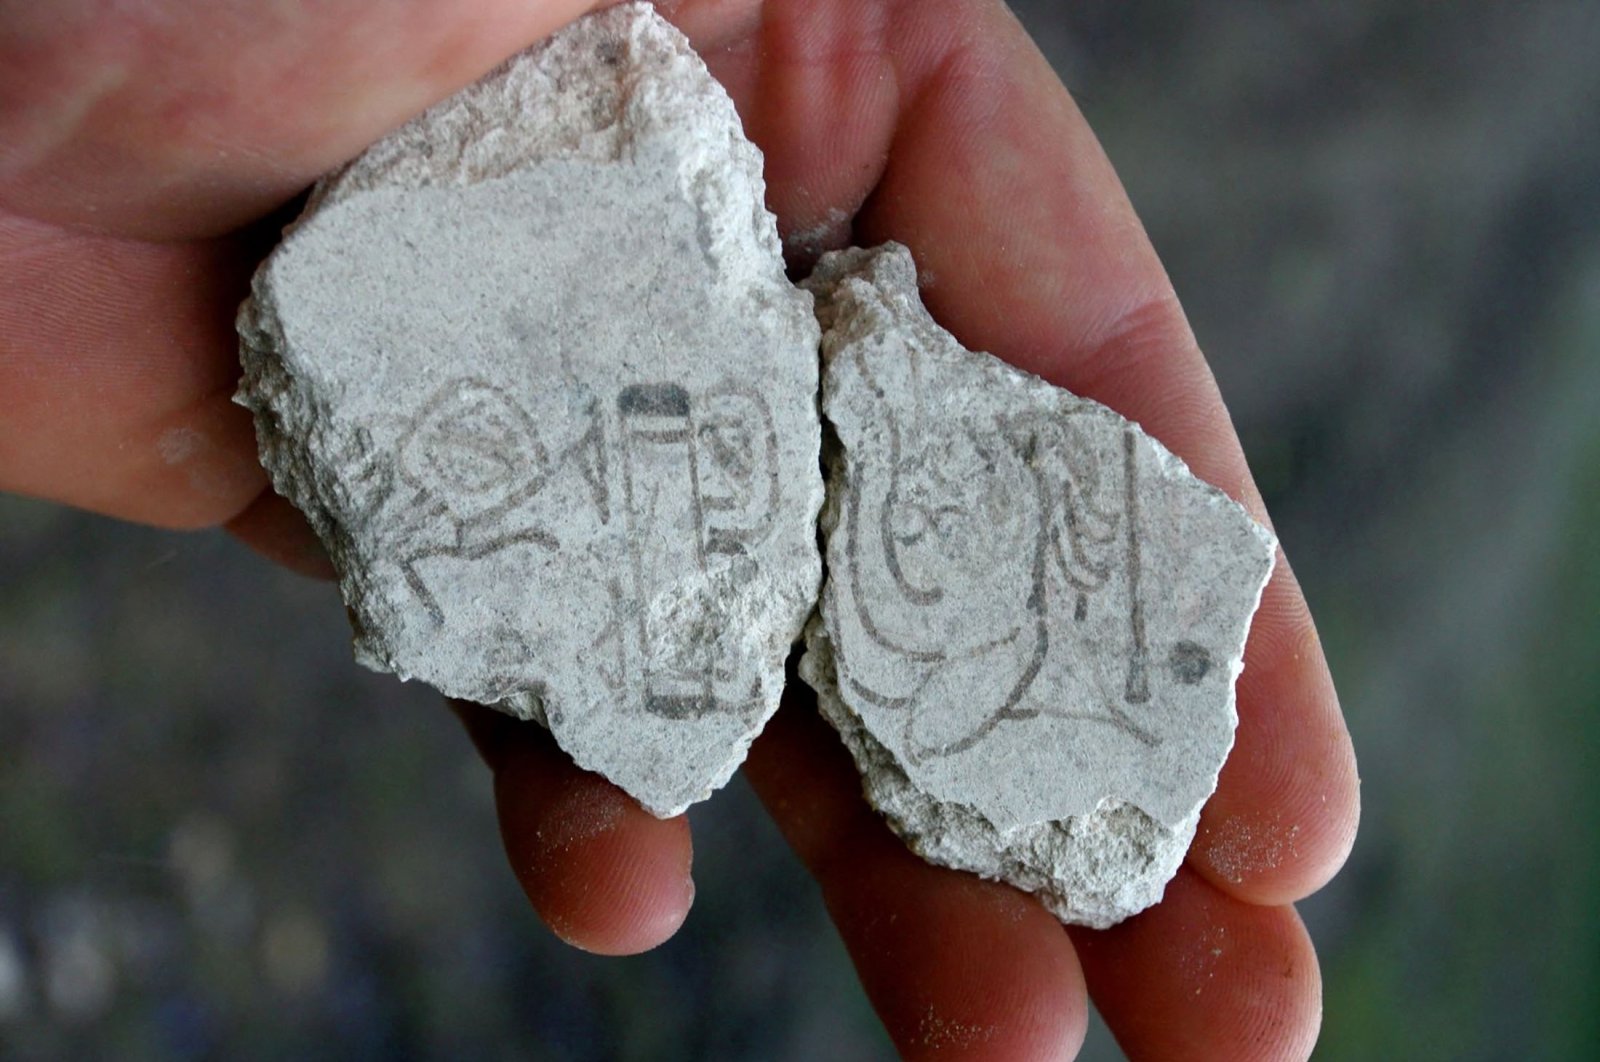 Two mural fragments dating to about 200 B.C. to 300 B.C., bearing evidence for the earliest use of the Maya calendar, from the San Bartolo Preclassic ancient Maya site in Guatemala. (Reuters Photo)